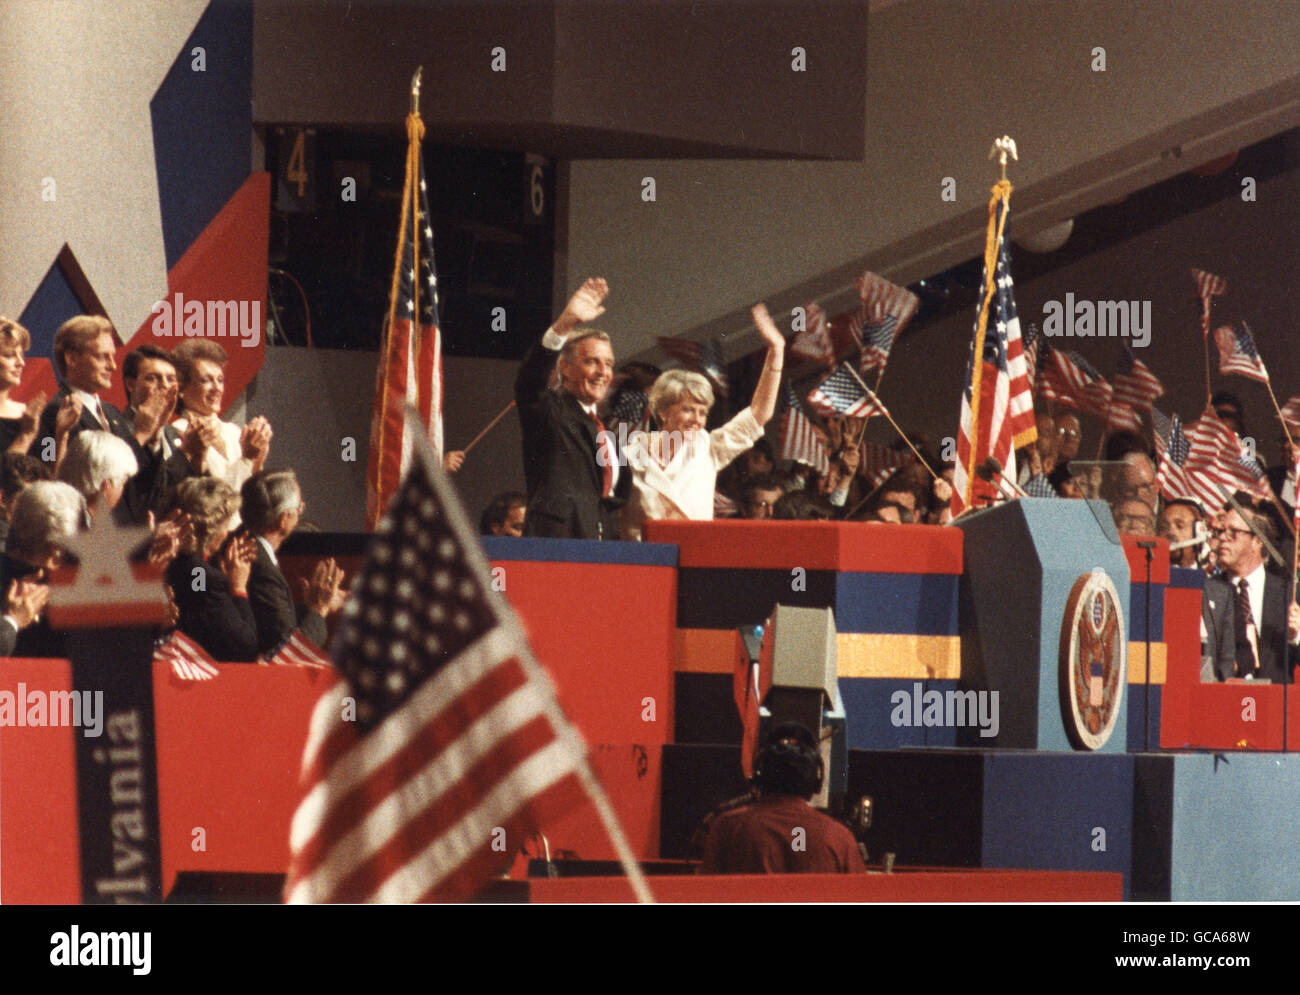 The 1984 Democratic ticket for President and Vie-President, Walter Mondale and Geraldine Ferraro, greet supporters at the nominating convention. Stock Photo